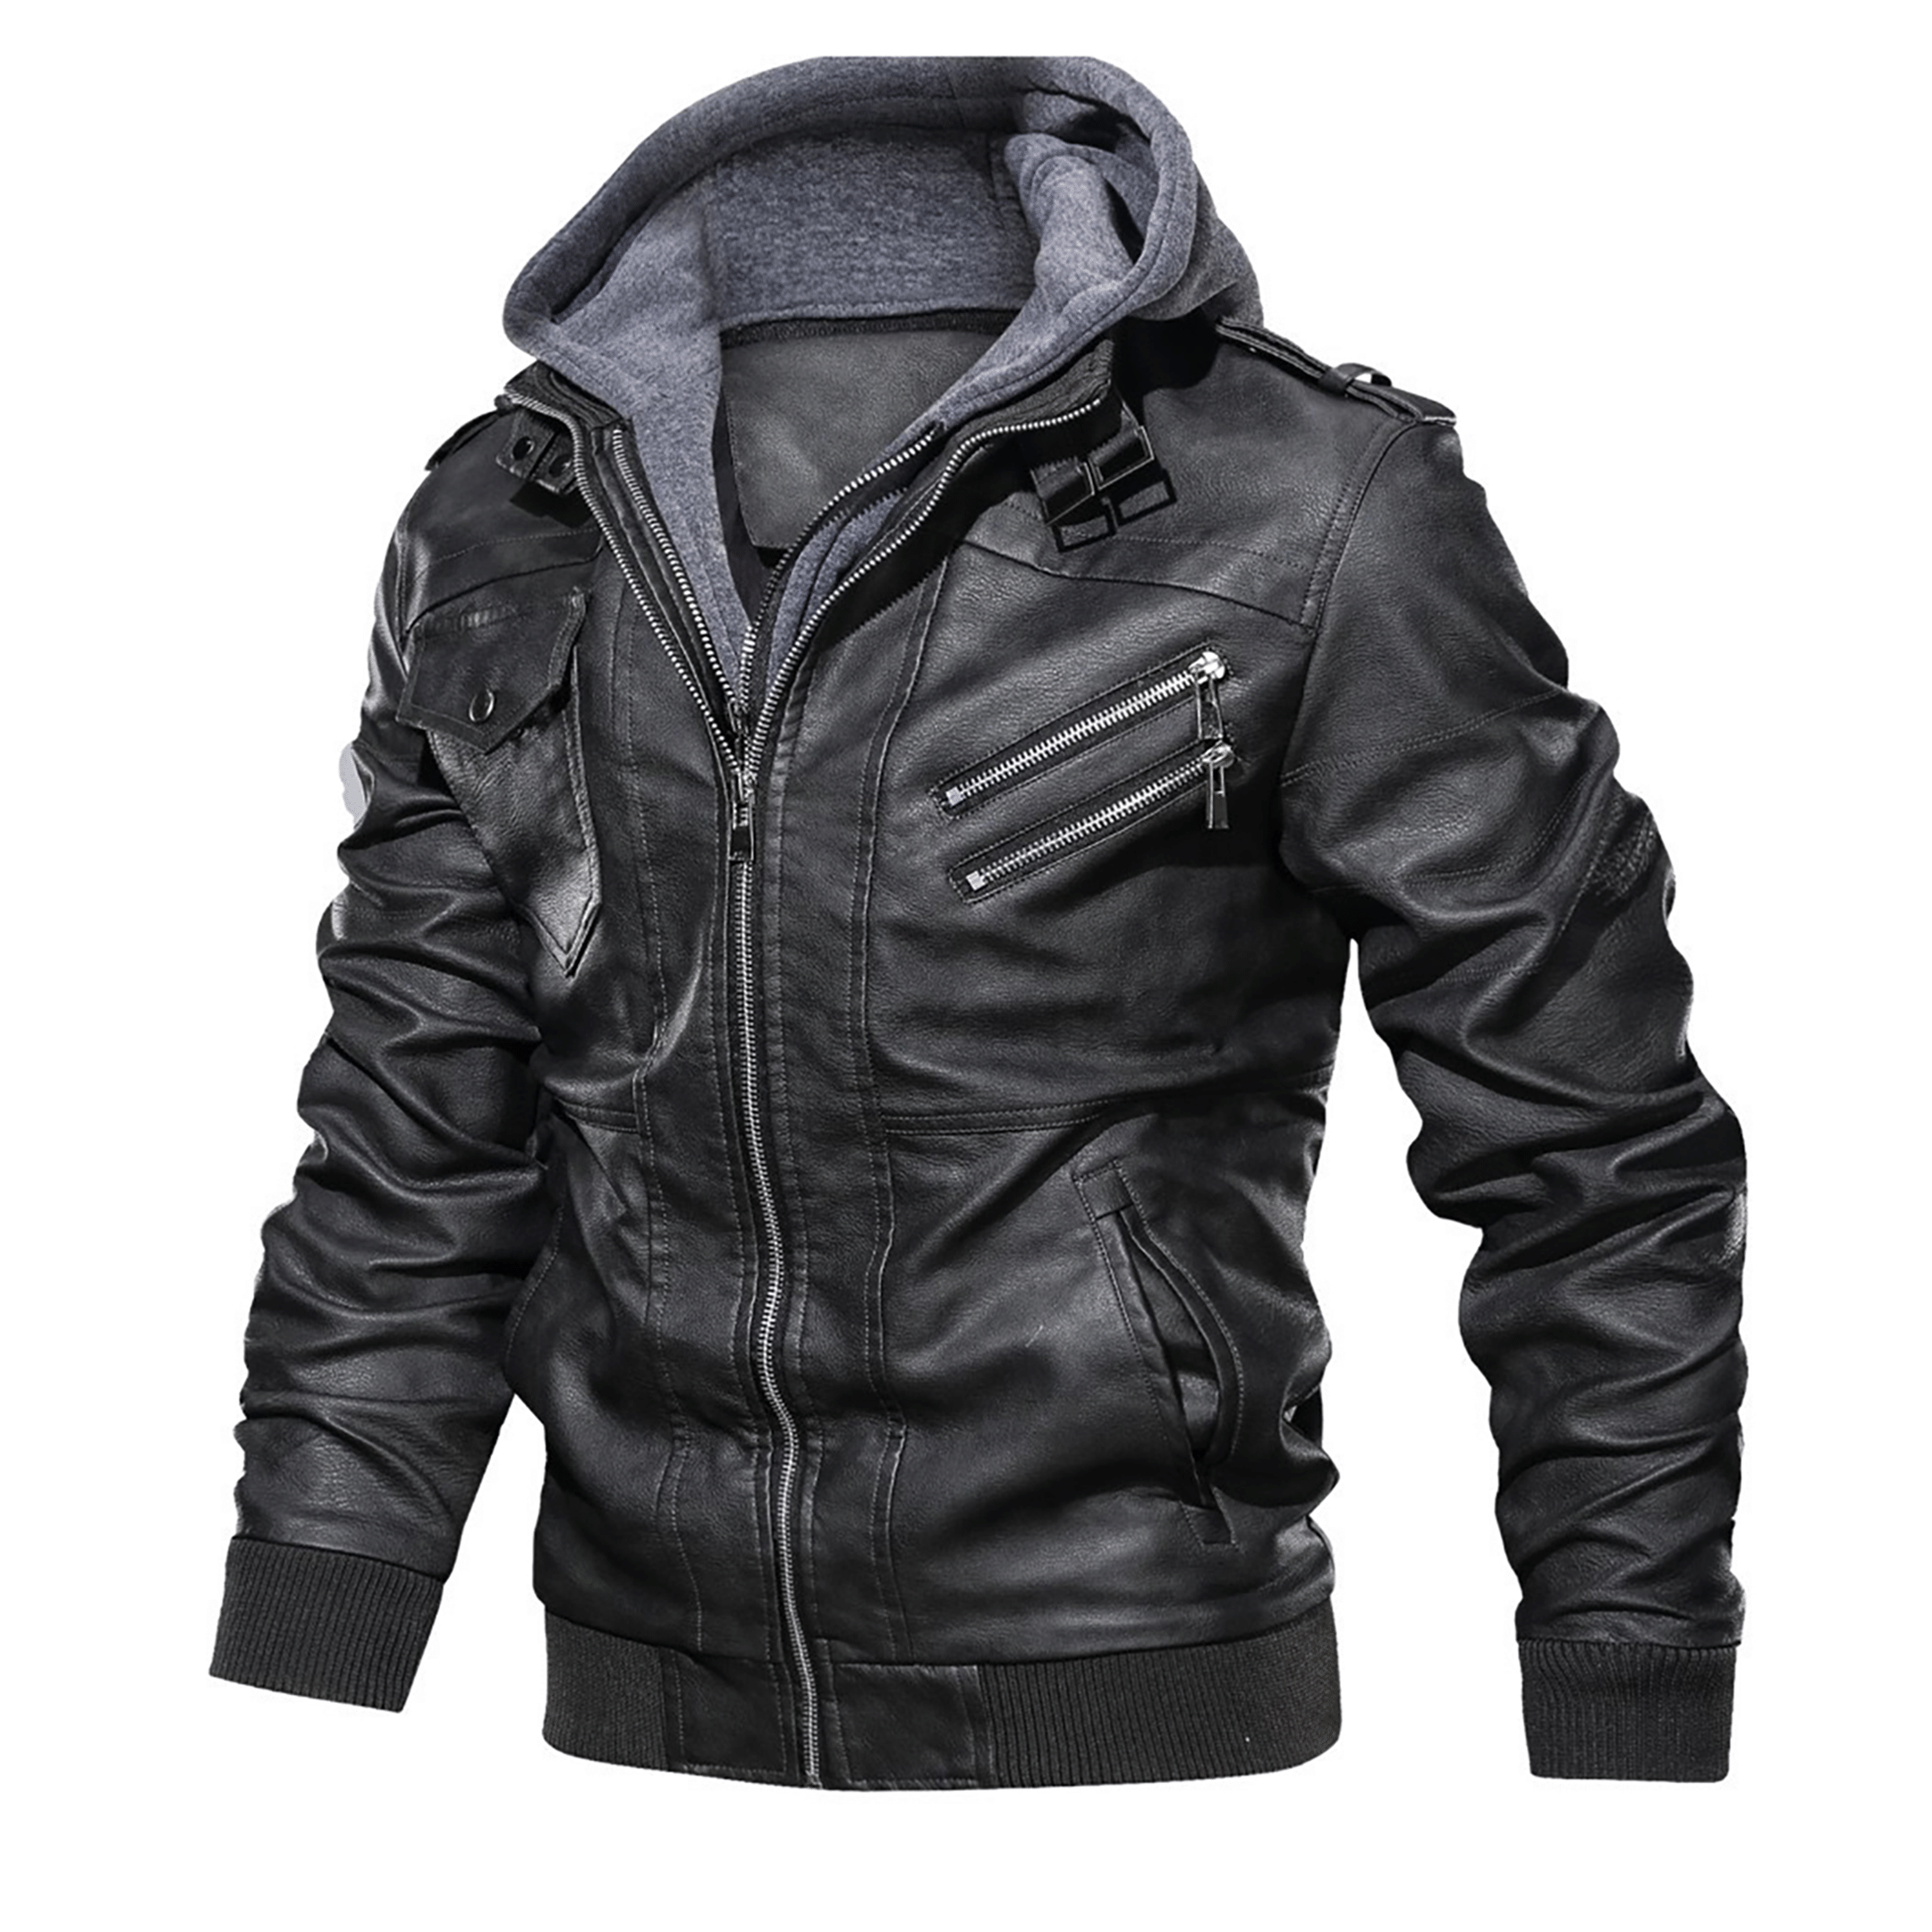 Top leather jackets and latest products 243